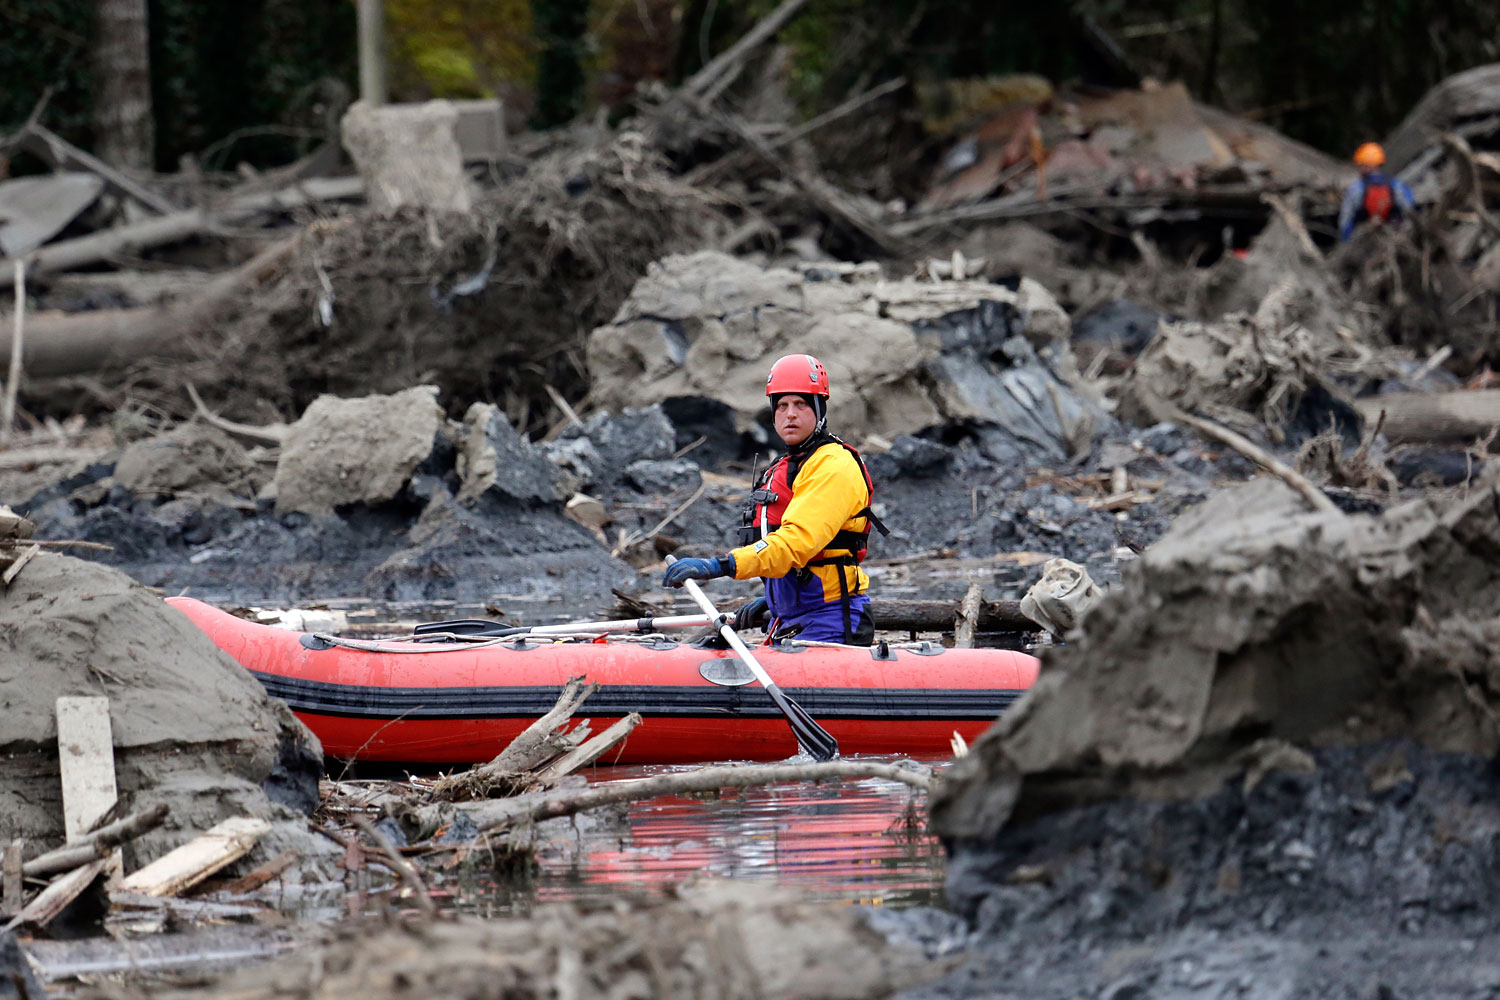 A searcher uses a small boat to look through debris from a deadly mudslide, March 25, 2014, in Oso, Wash.